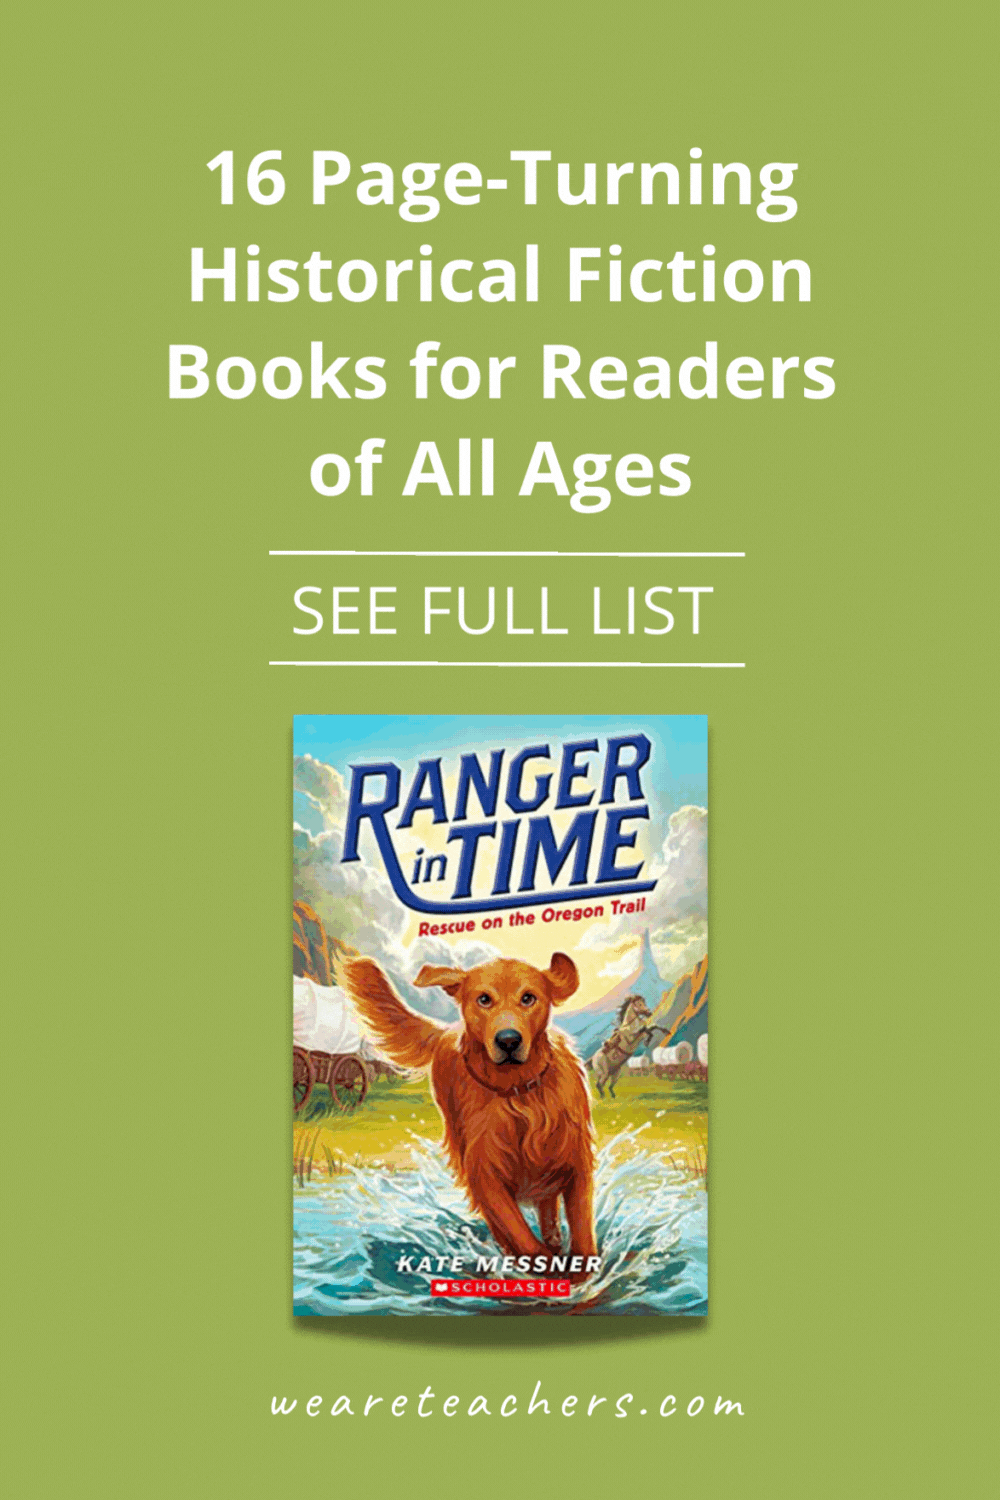 Make teaching history fun and engaging in the classroom with these 16 interesting historical fiction books for kids!